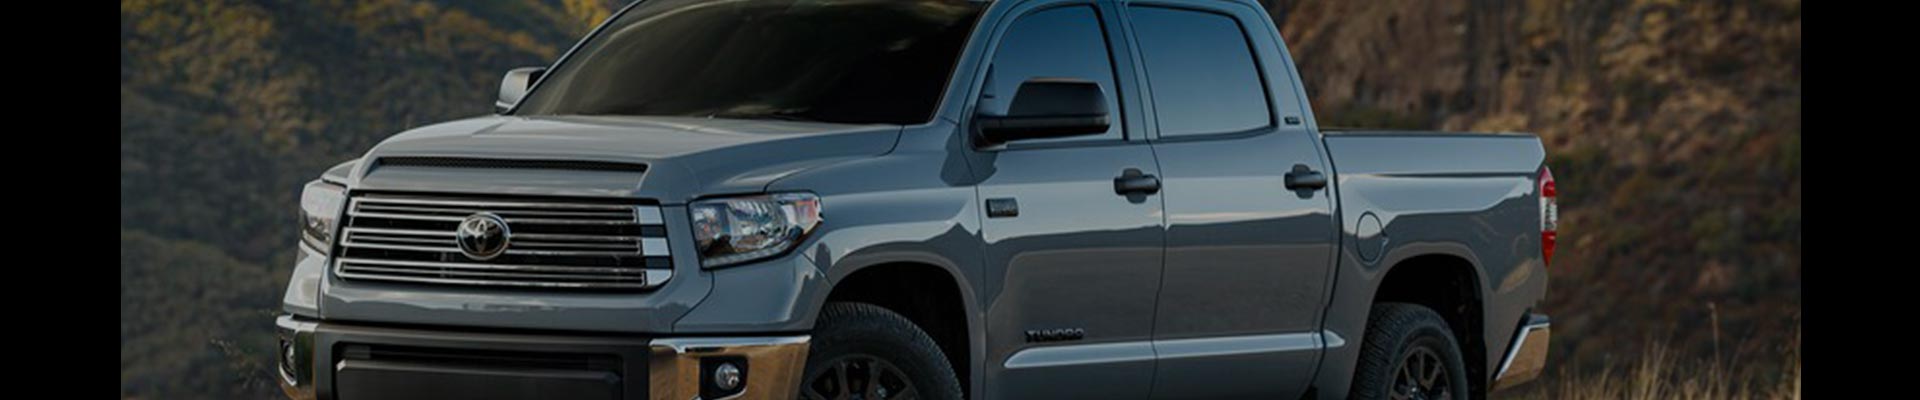 Shop Replacement and OEM 2001 Toyota Tundra Parts with Discounted Price on the Net